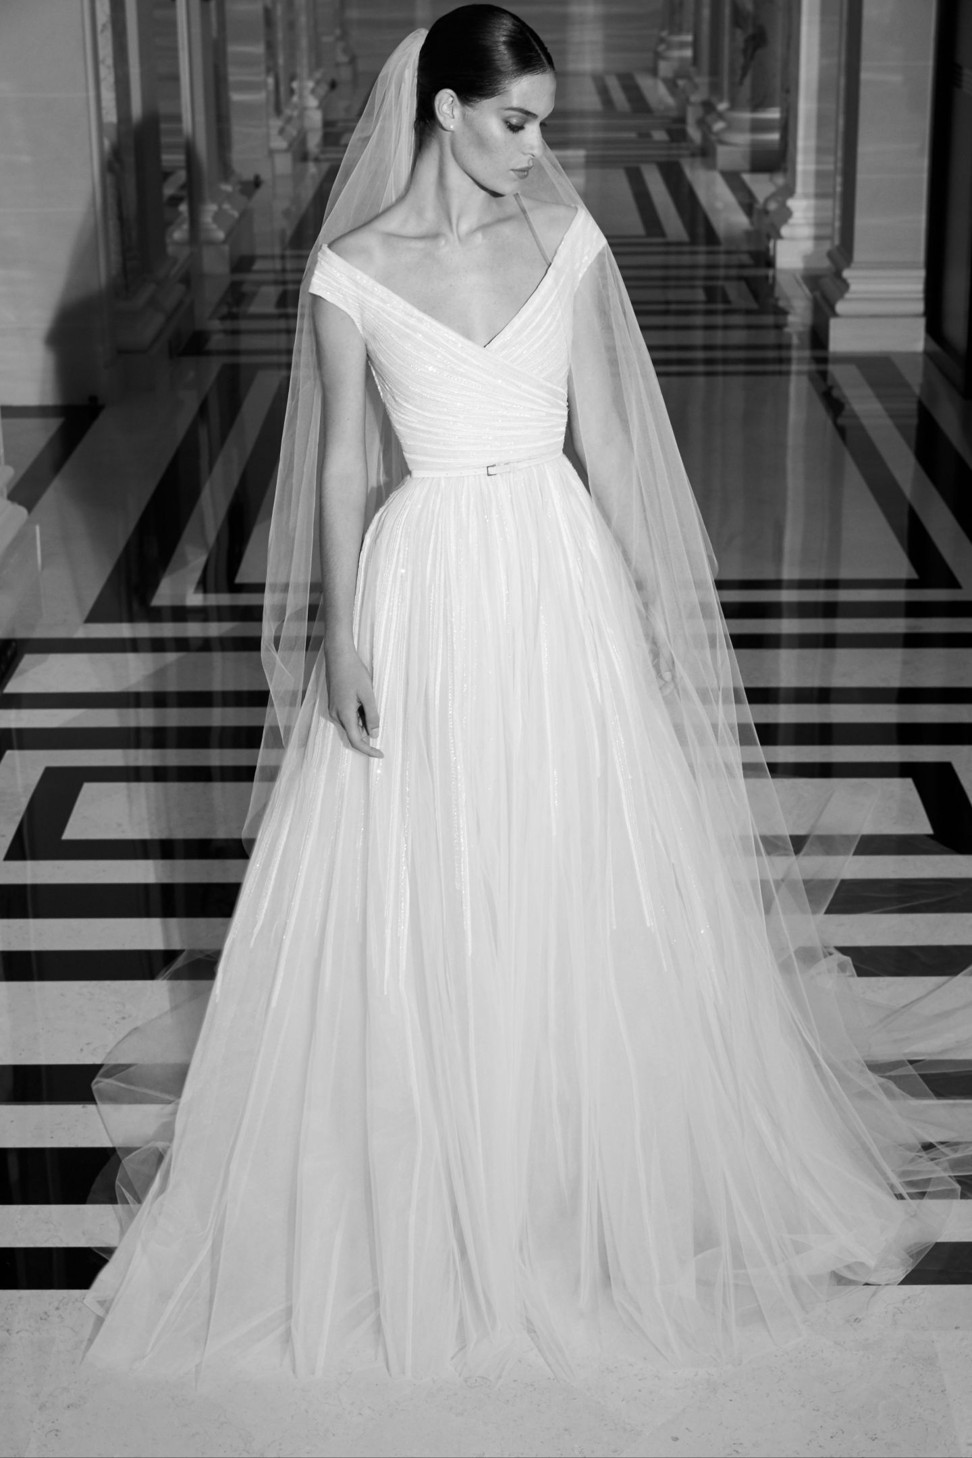 A simple yet stunning wedding gown from Elie Saab